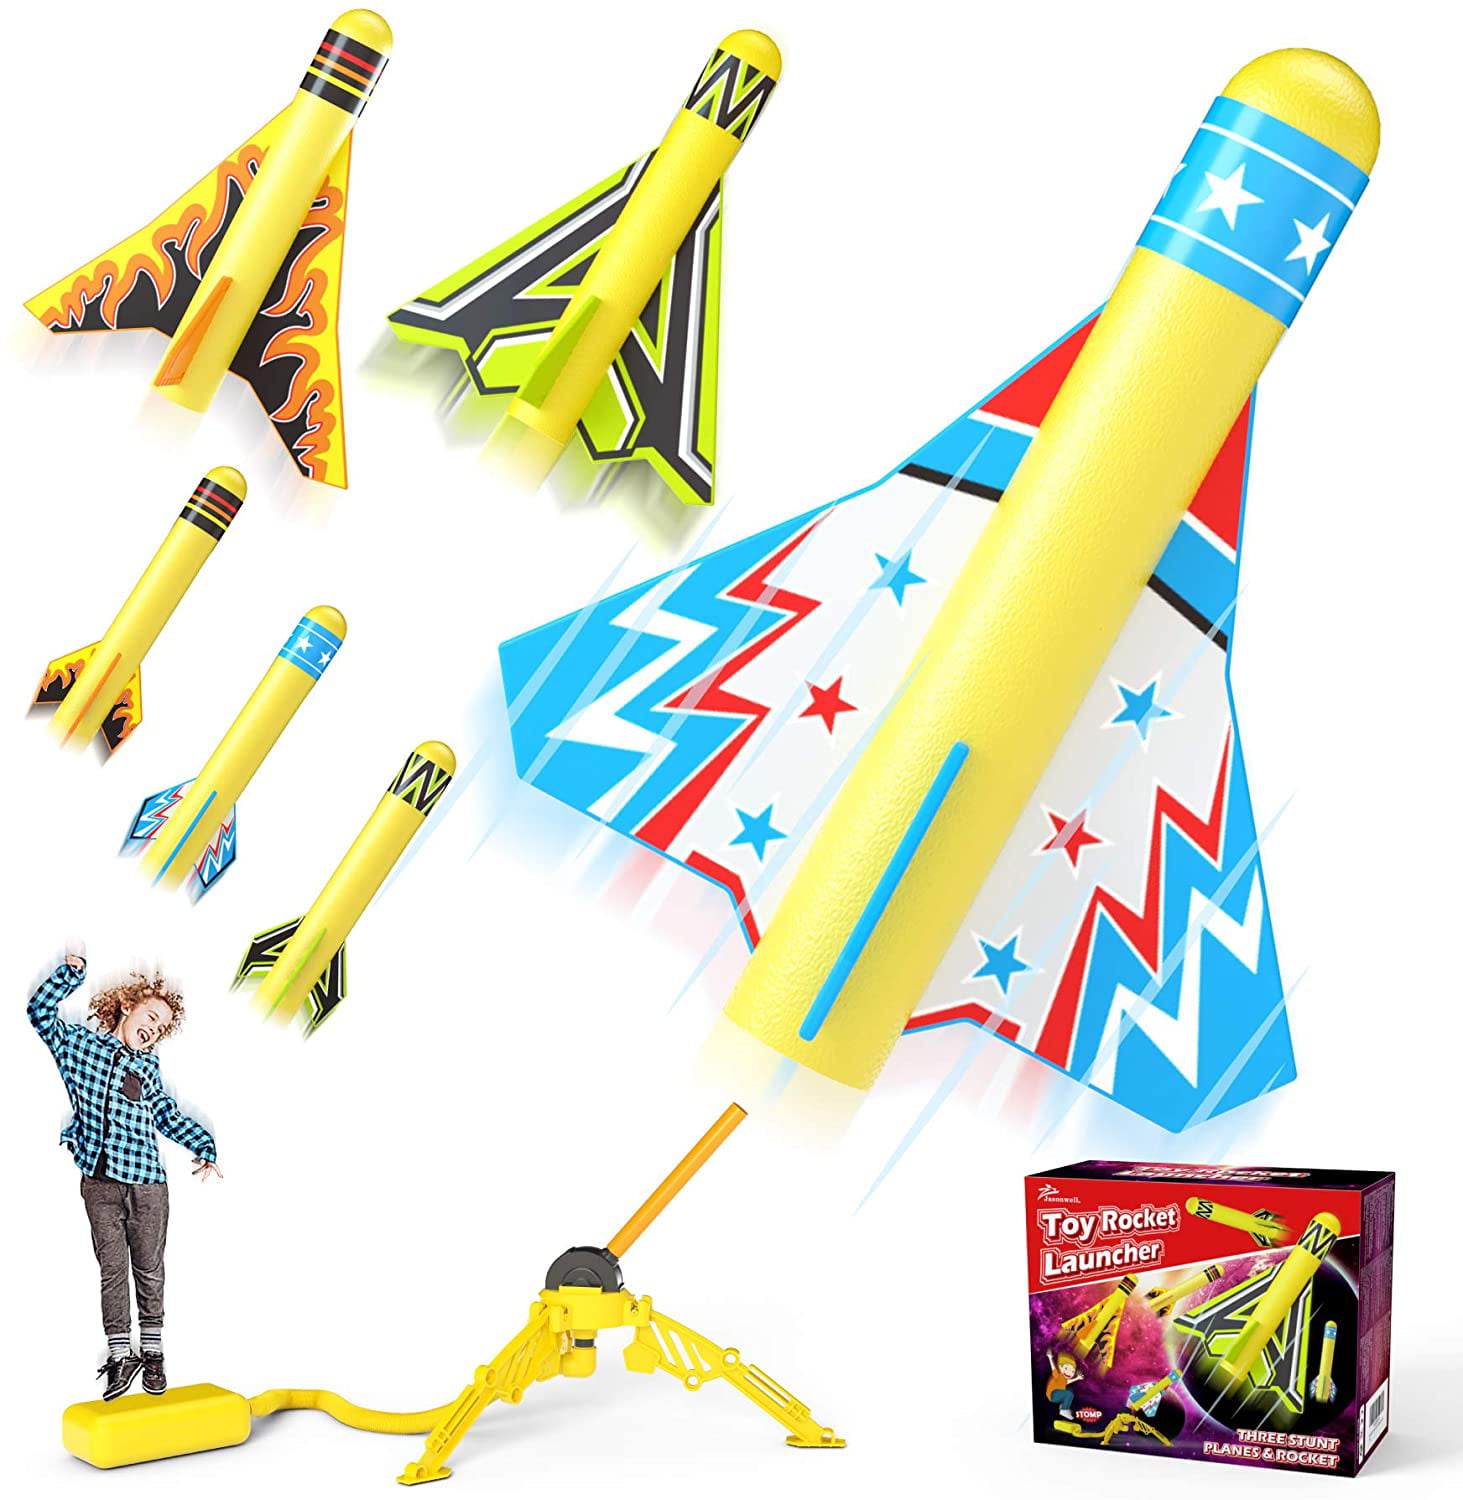 Kiddie Play Rocket Launcher for Kids to Stomp on With 6 Rockets Outdoor Toys Gif for sale online 